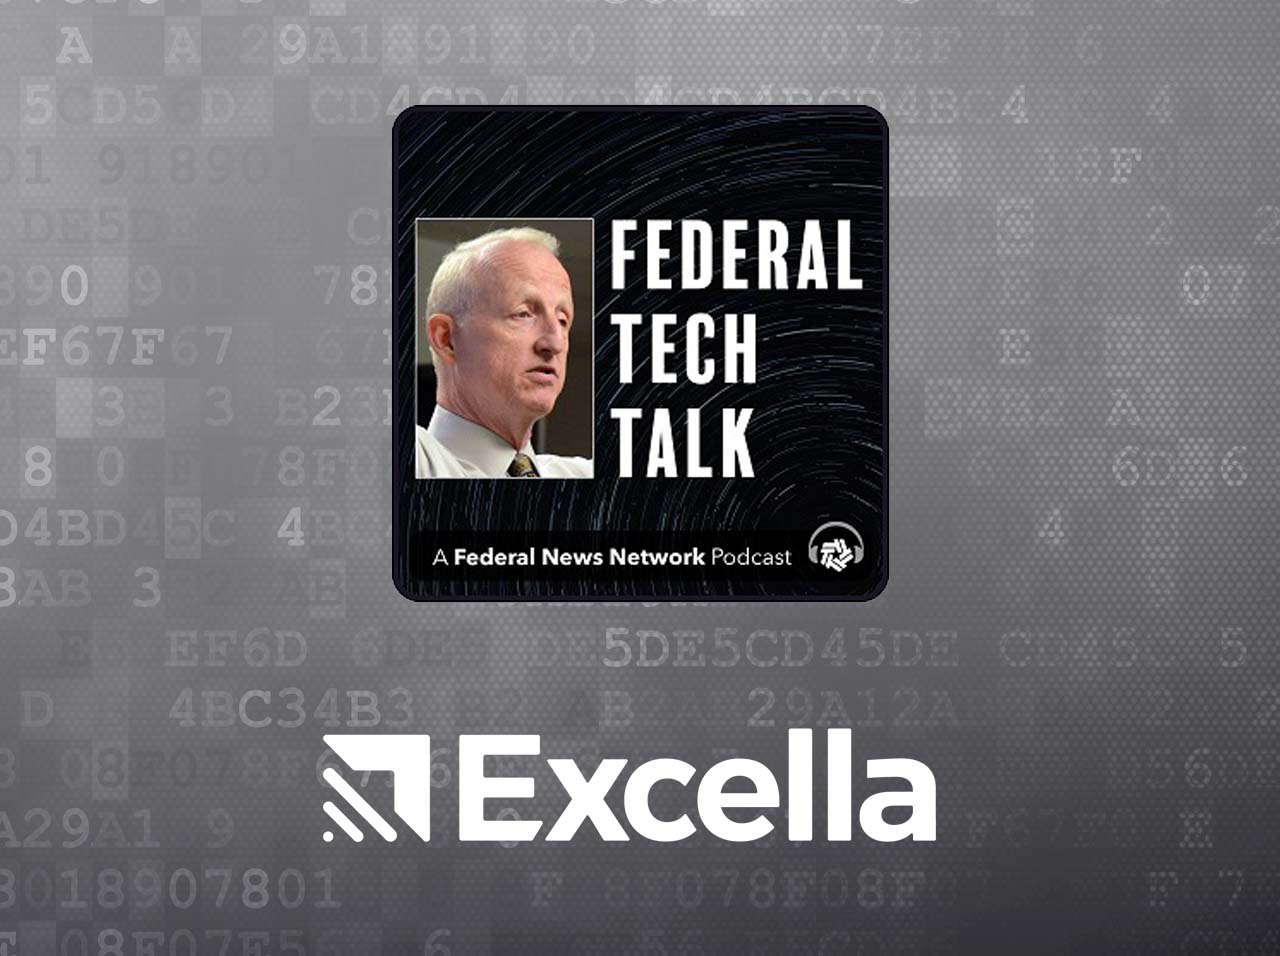 The Federal Tech Talk logo and Excella's logo are on a grey background.